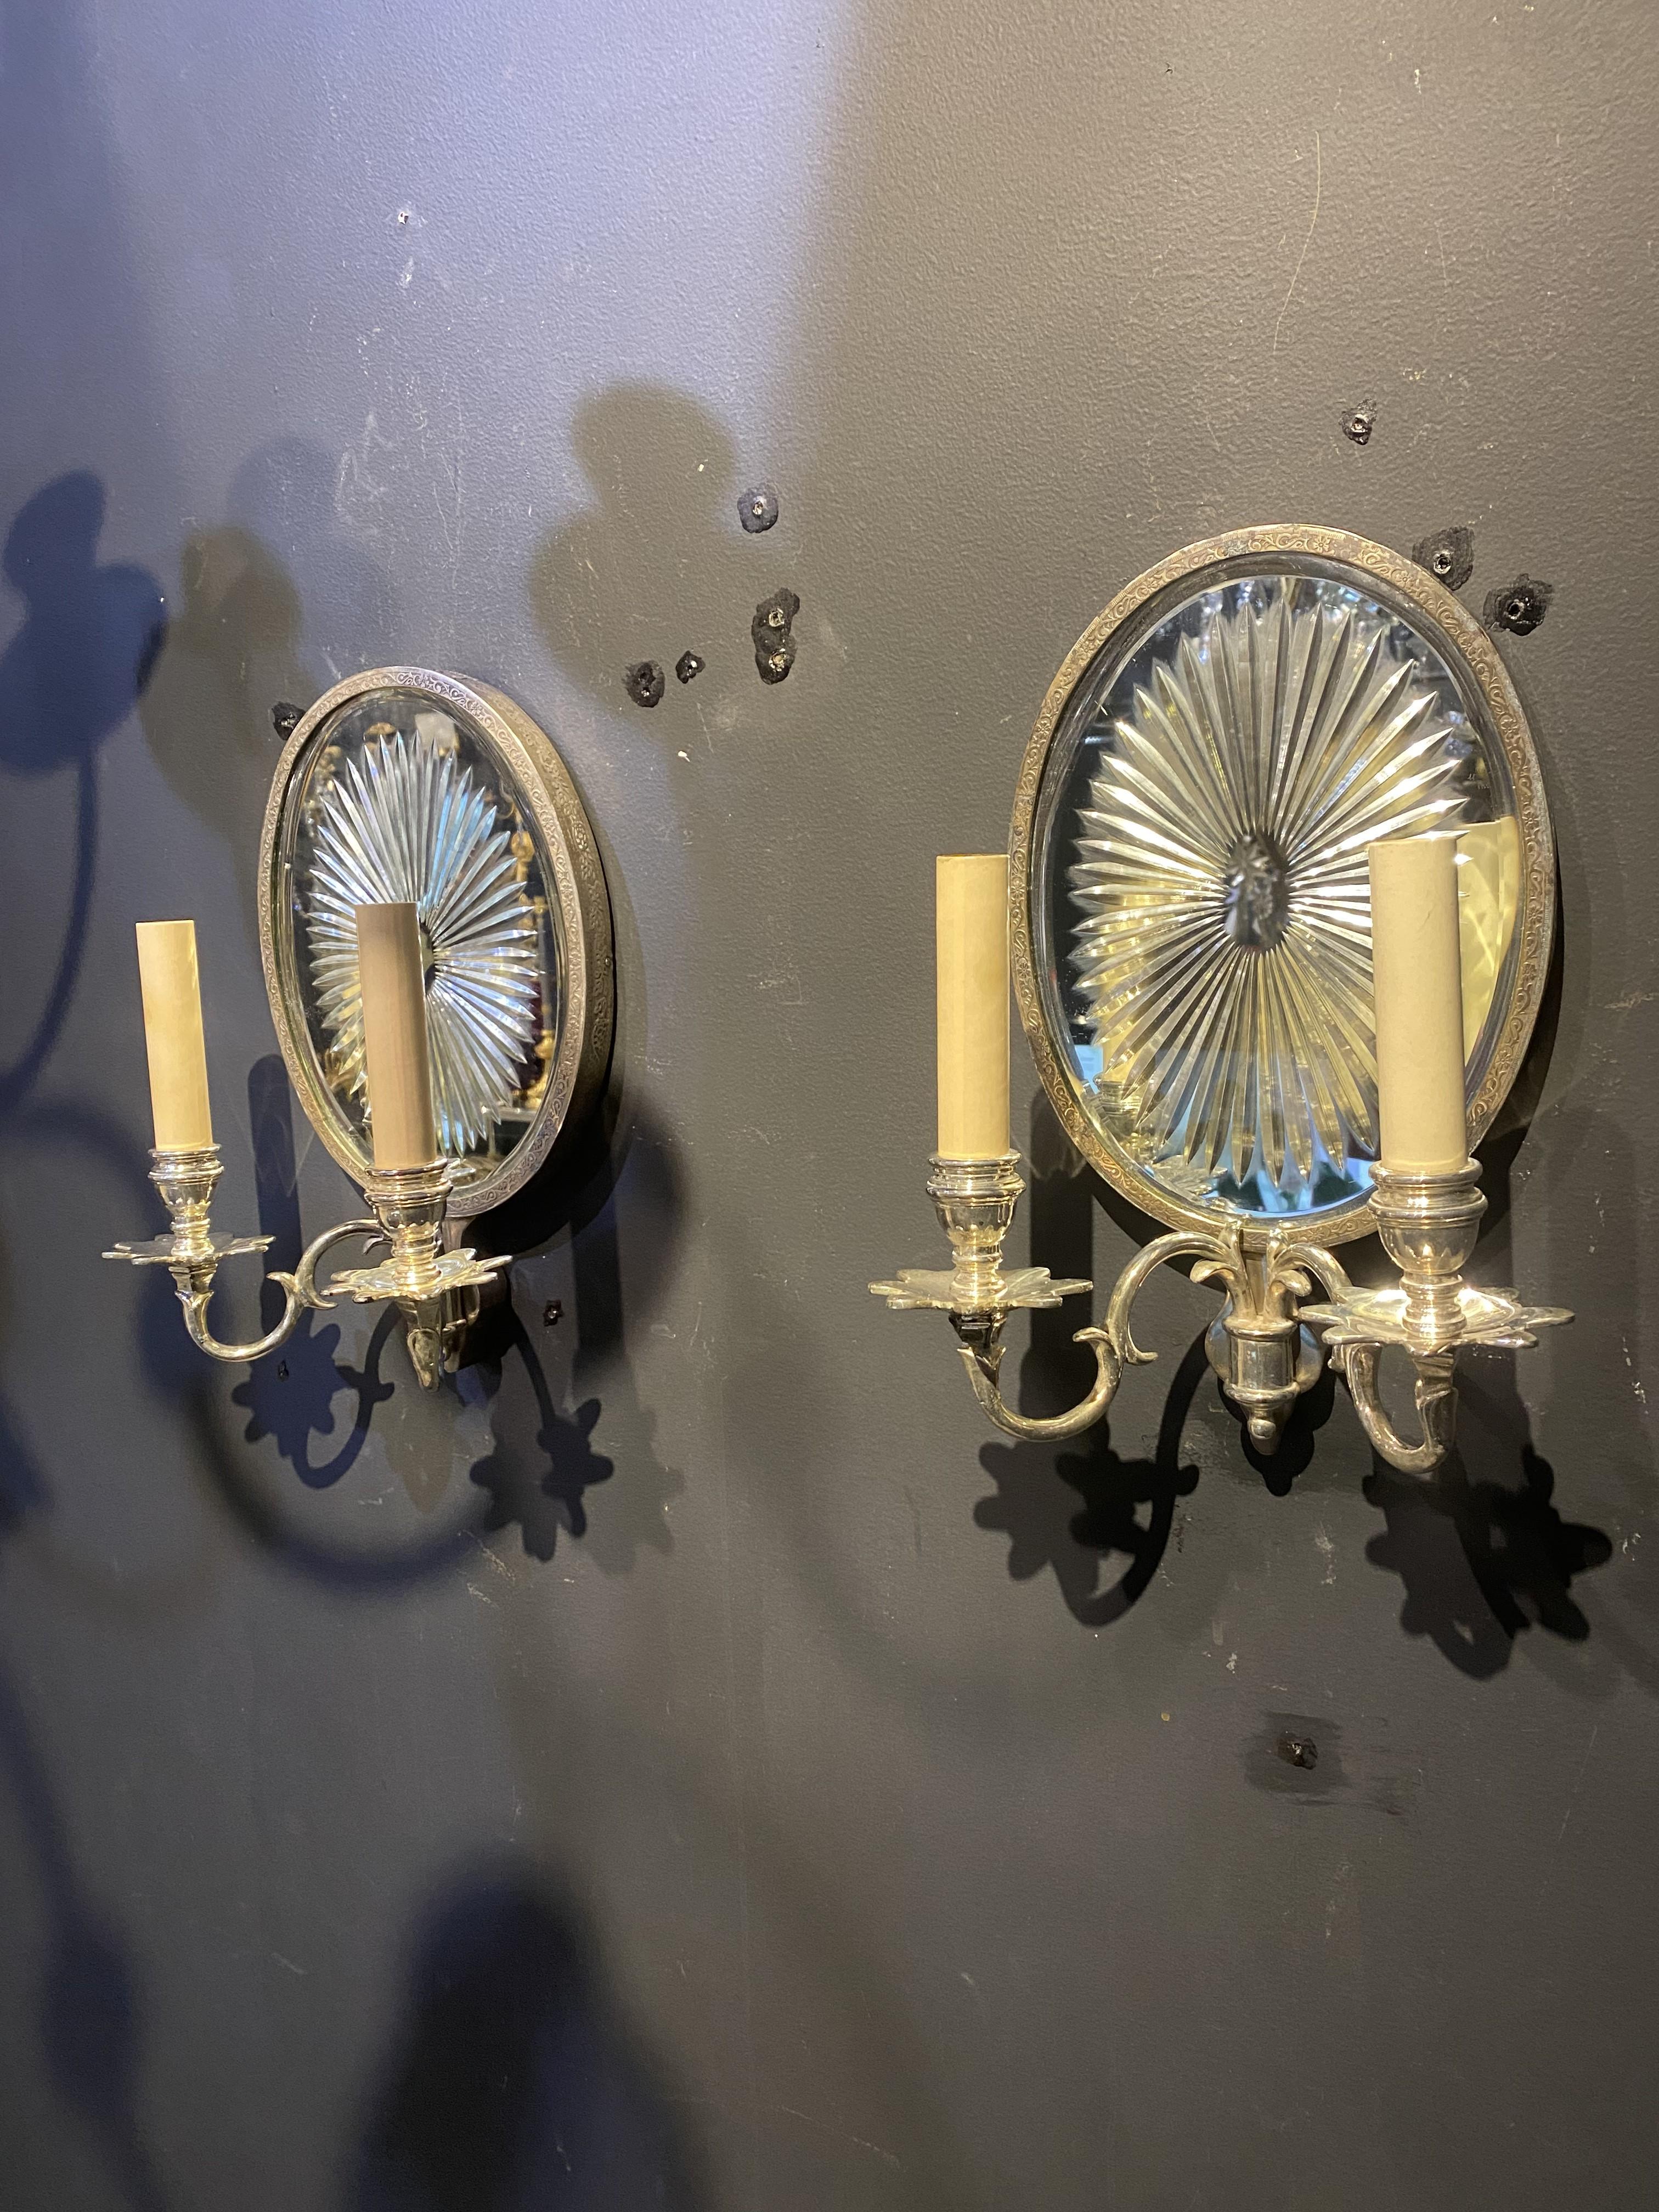 A pair of circa 1920’s Caldwell etched mirrored sconces with silver plated arms for two lights